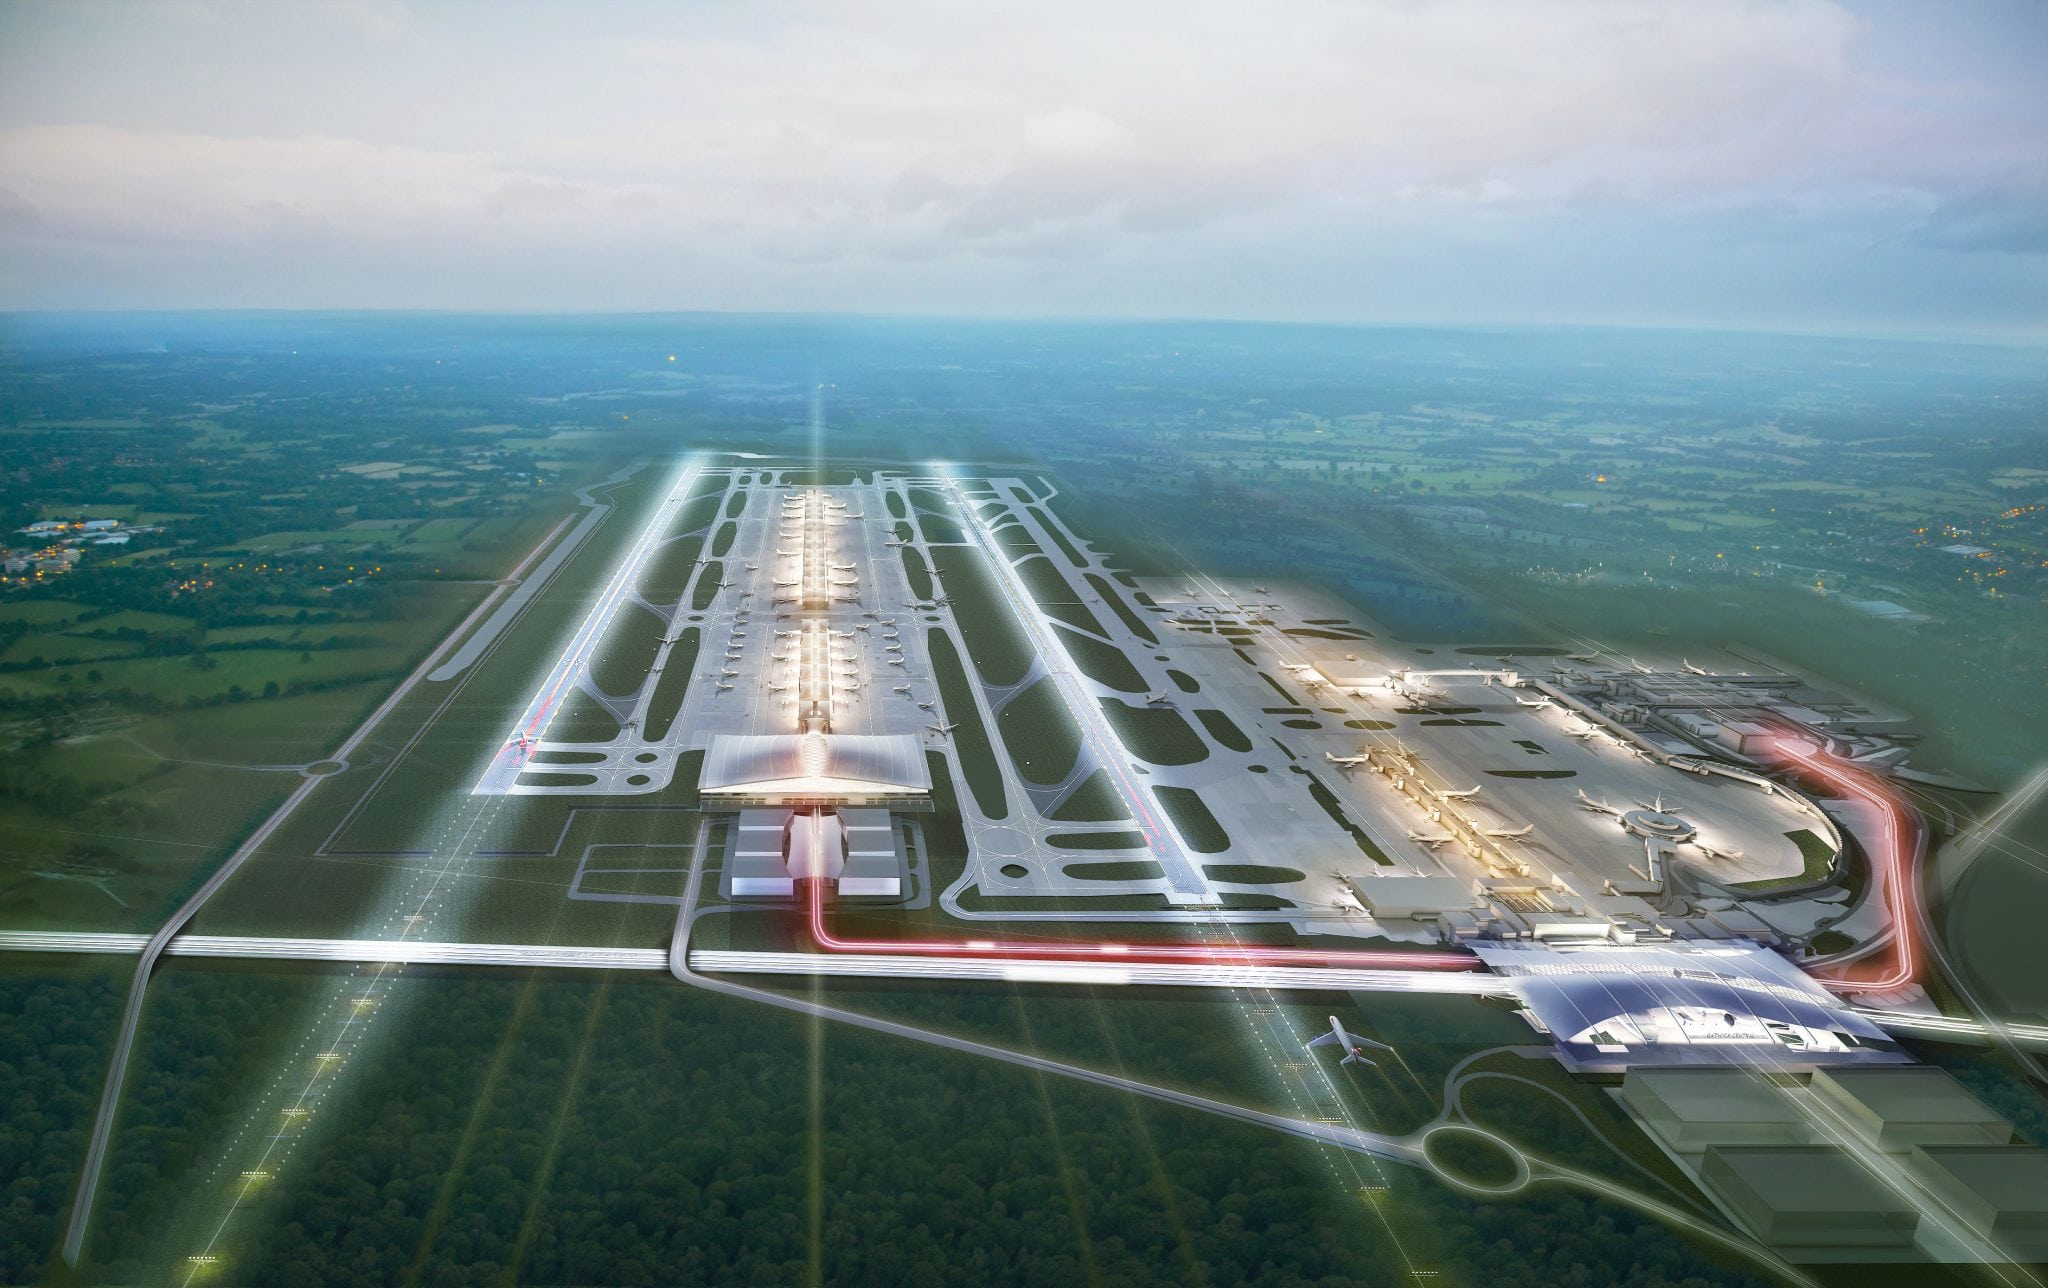 Farrell's London - image of a two-runway Gatwick/ Gatwick Airport.